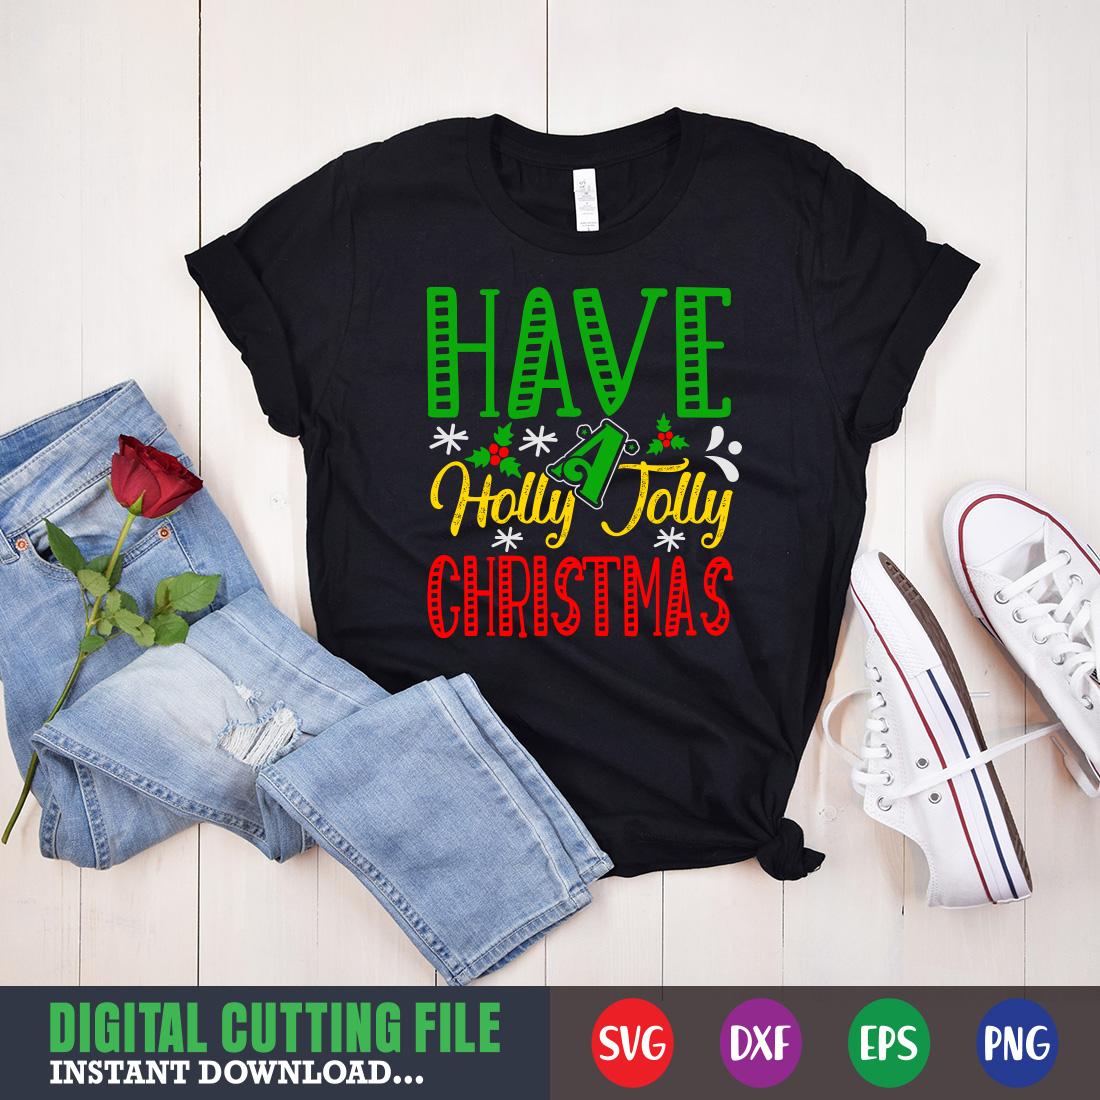 Image of a T-shirt with colorful Have A Holly Jolly Christmas slogan.